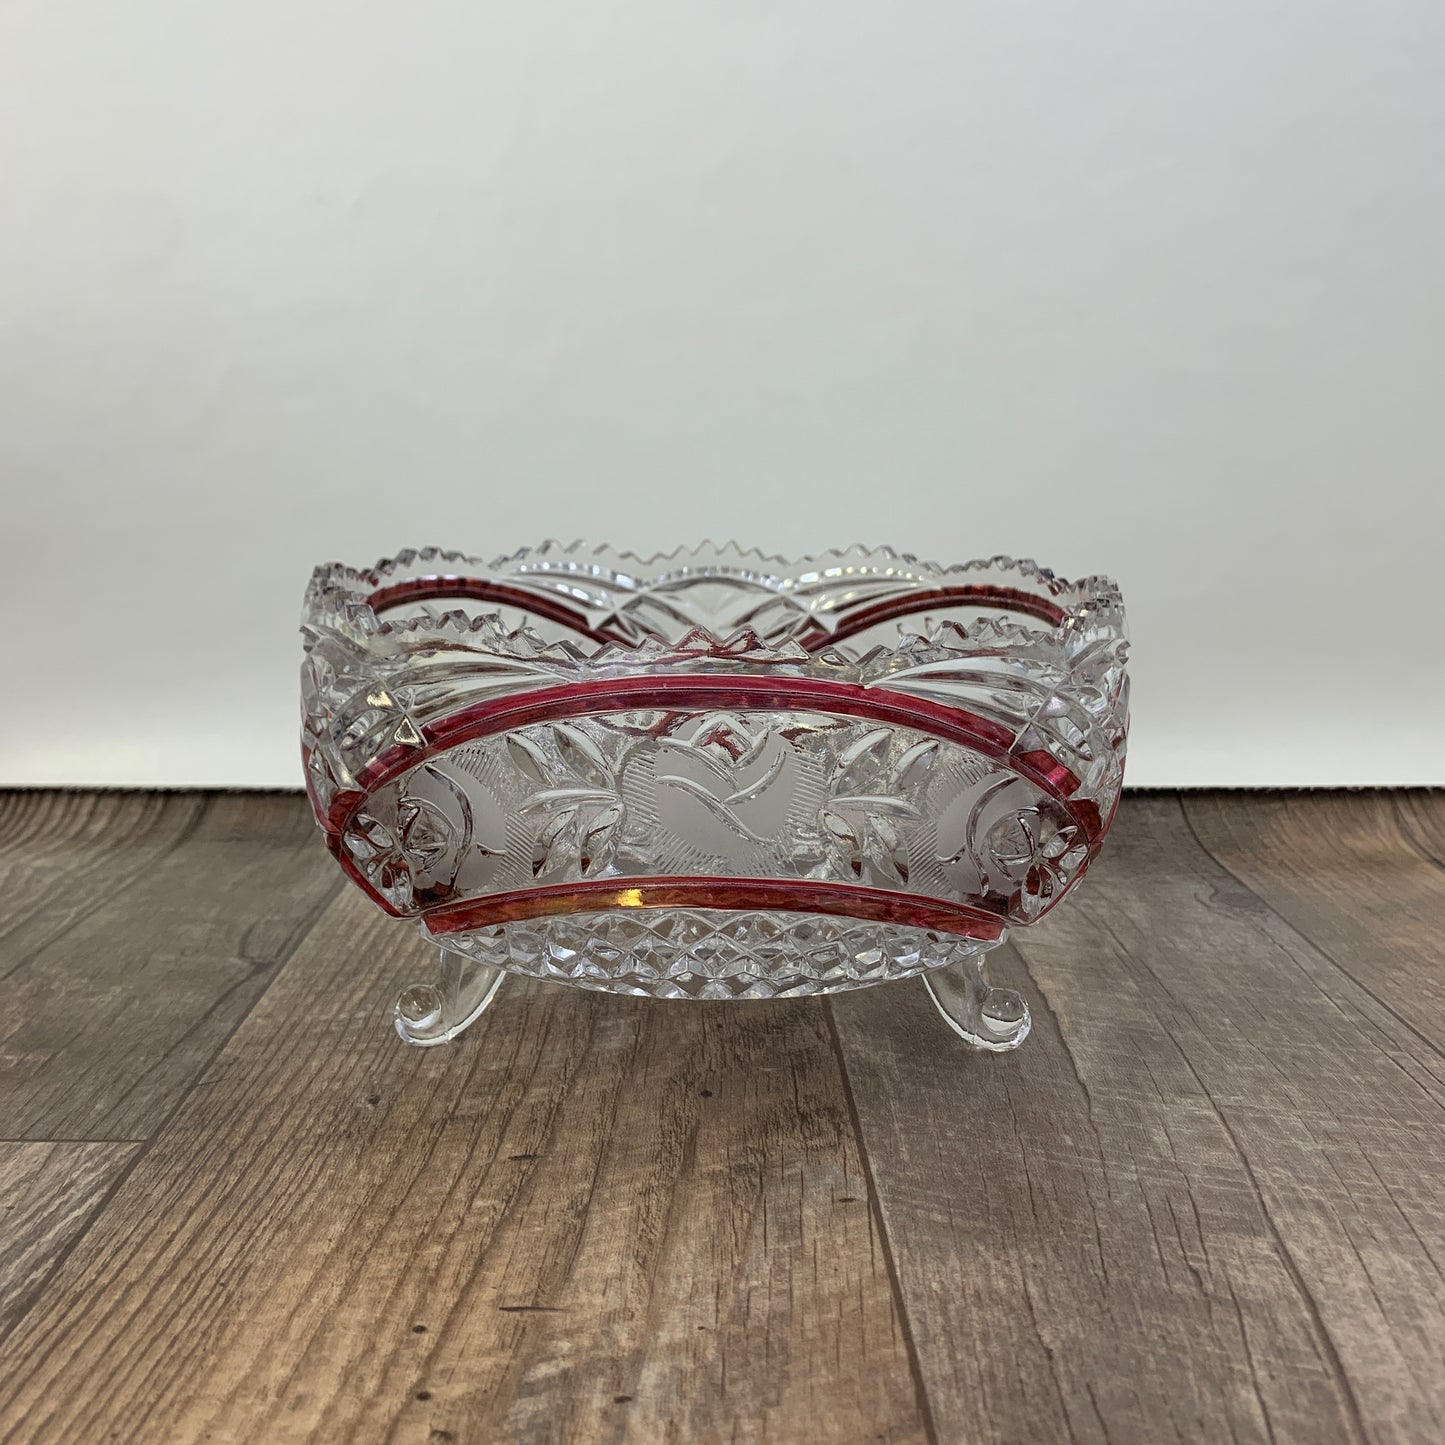 Rose Pattern Footed Crystal Bowl Grand Millennial Decor Crystal Planter